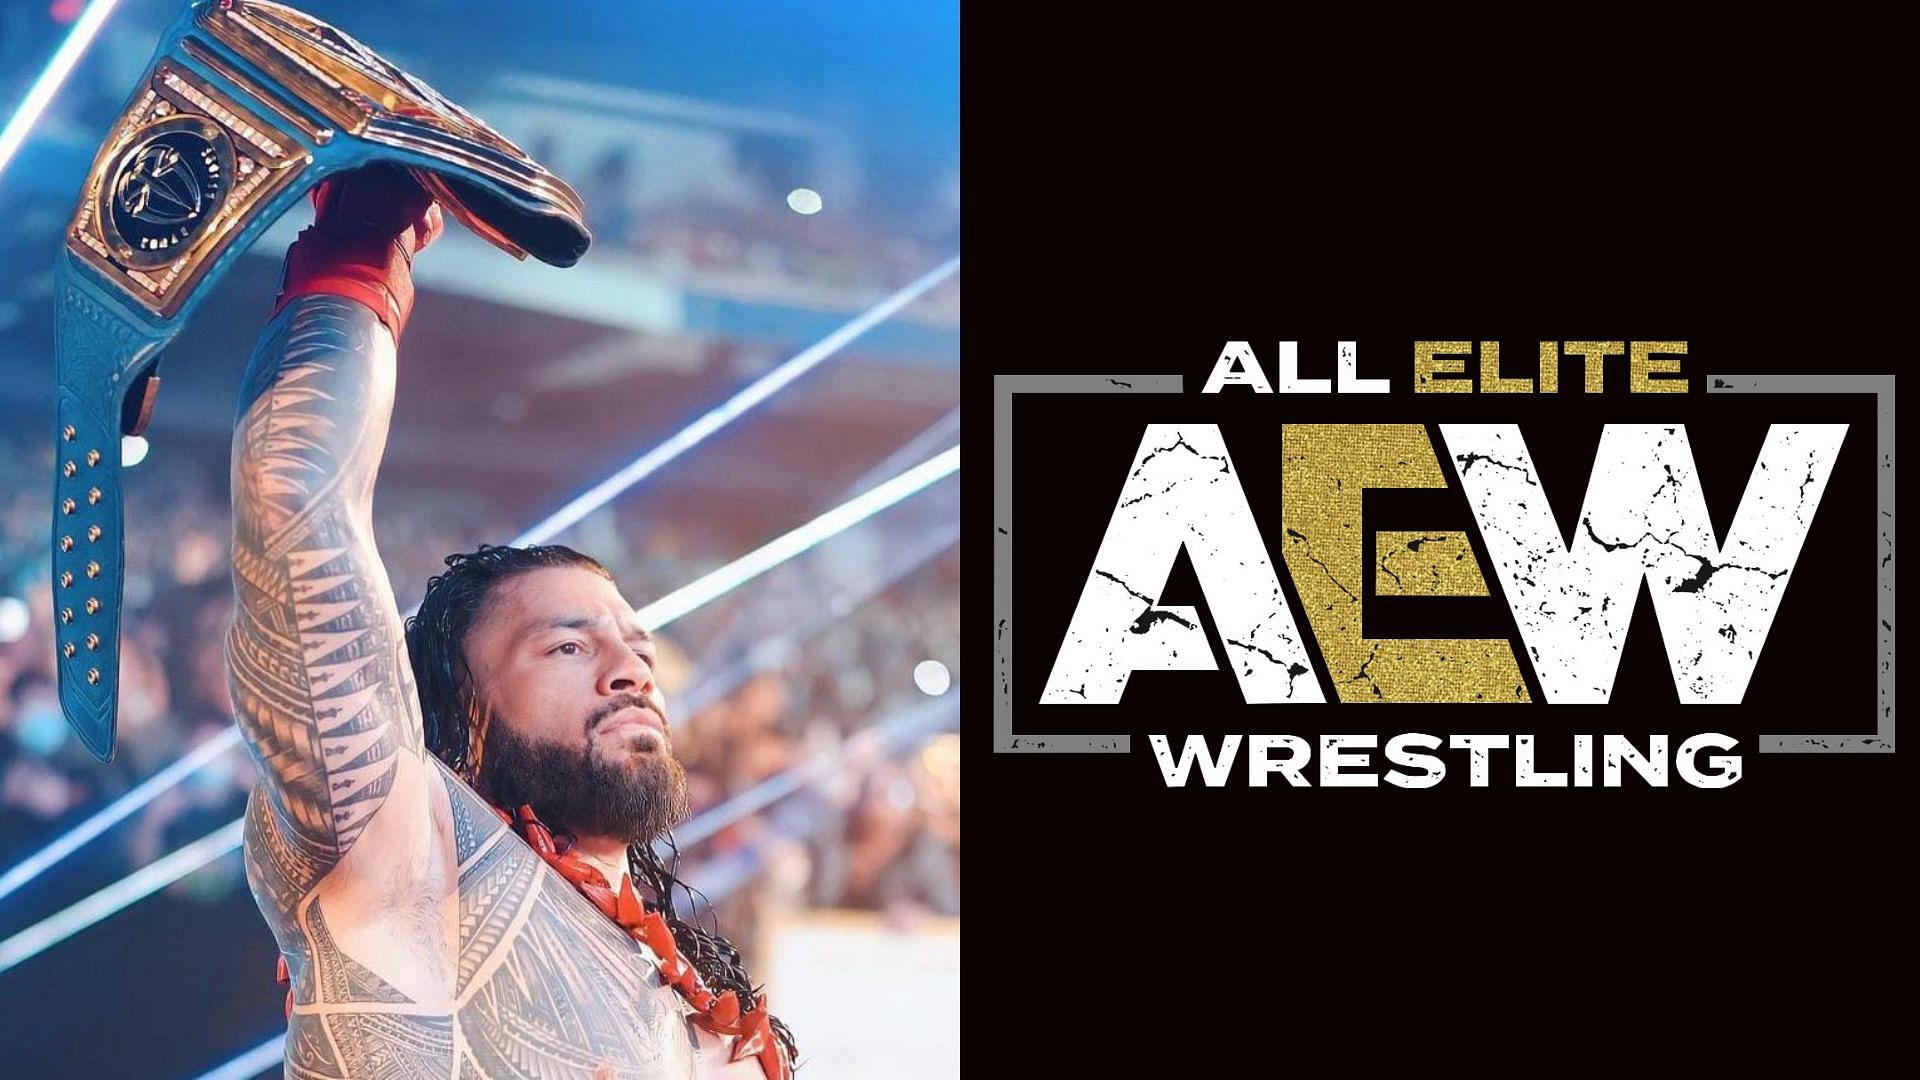 Will an AEW star face Roman Reigns in the future?